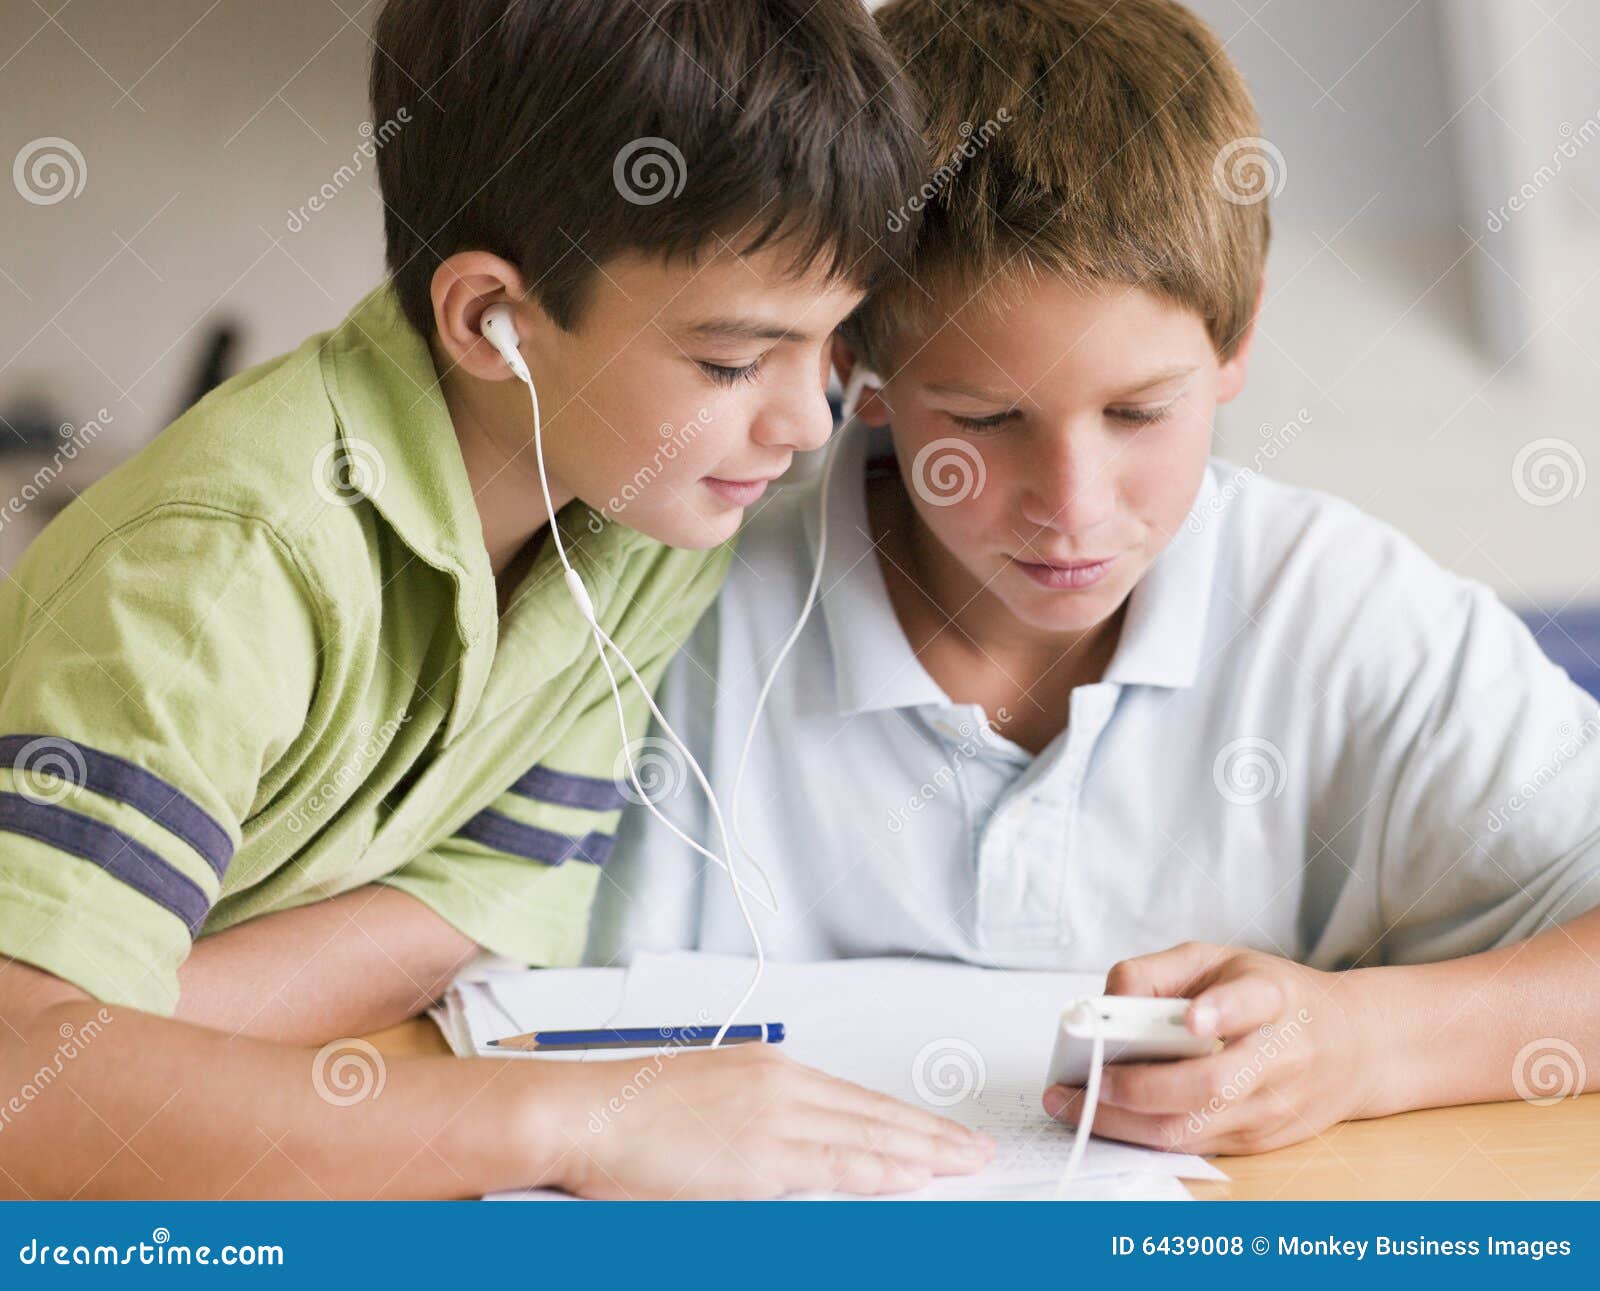 Homework & Study Distraction Tips From The Experts | Oxford Learning